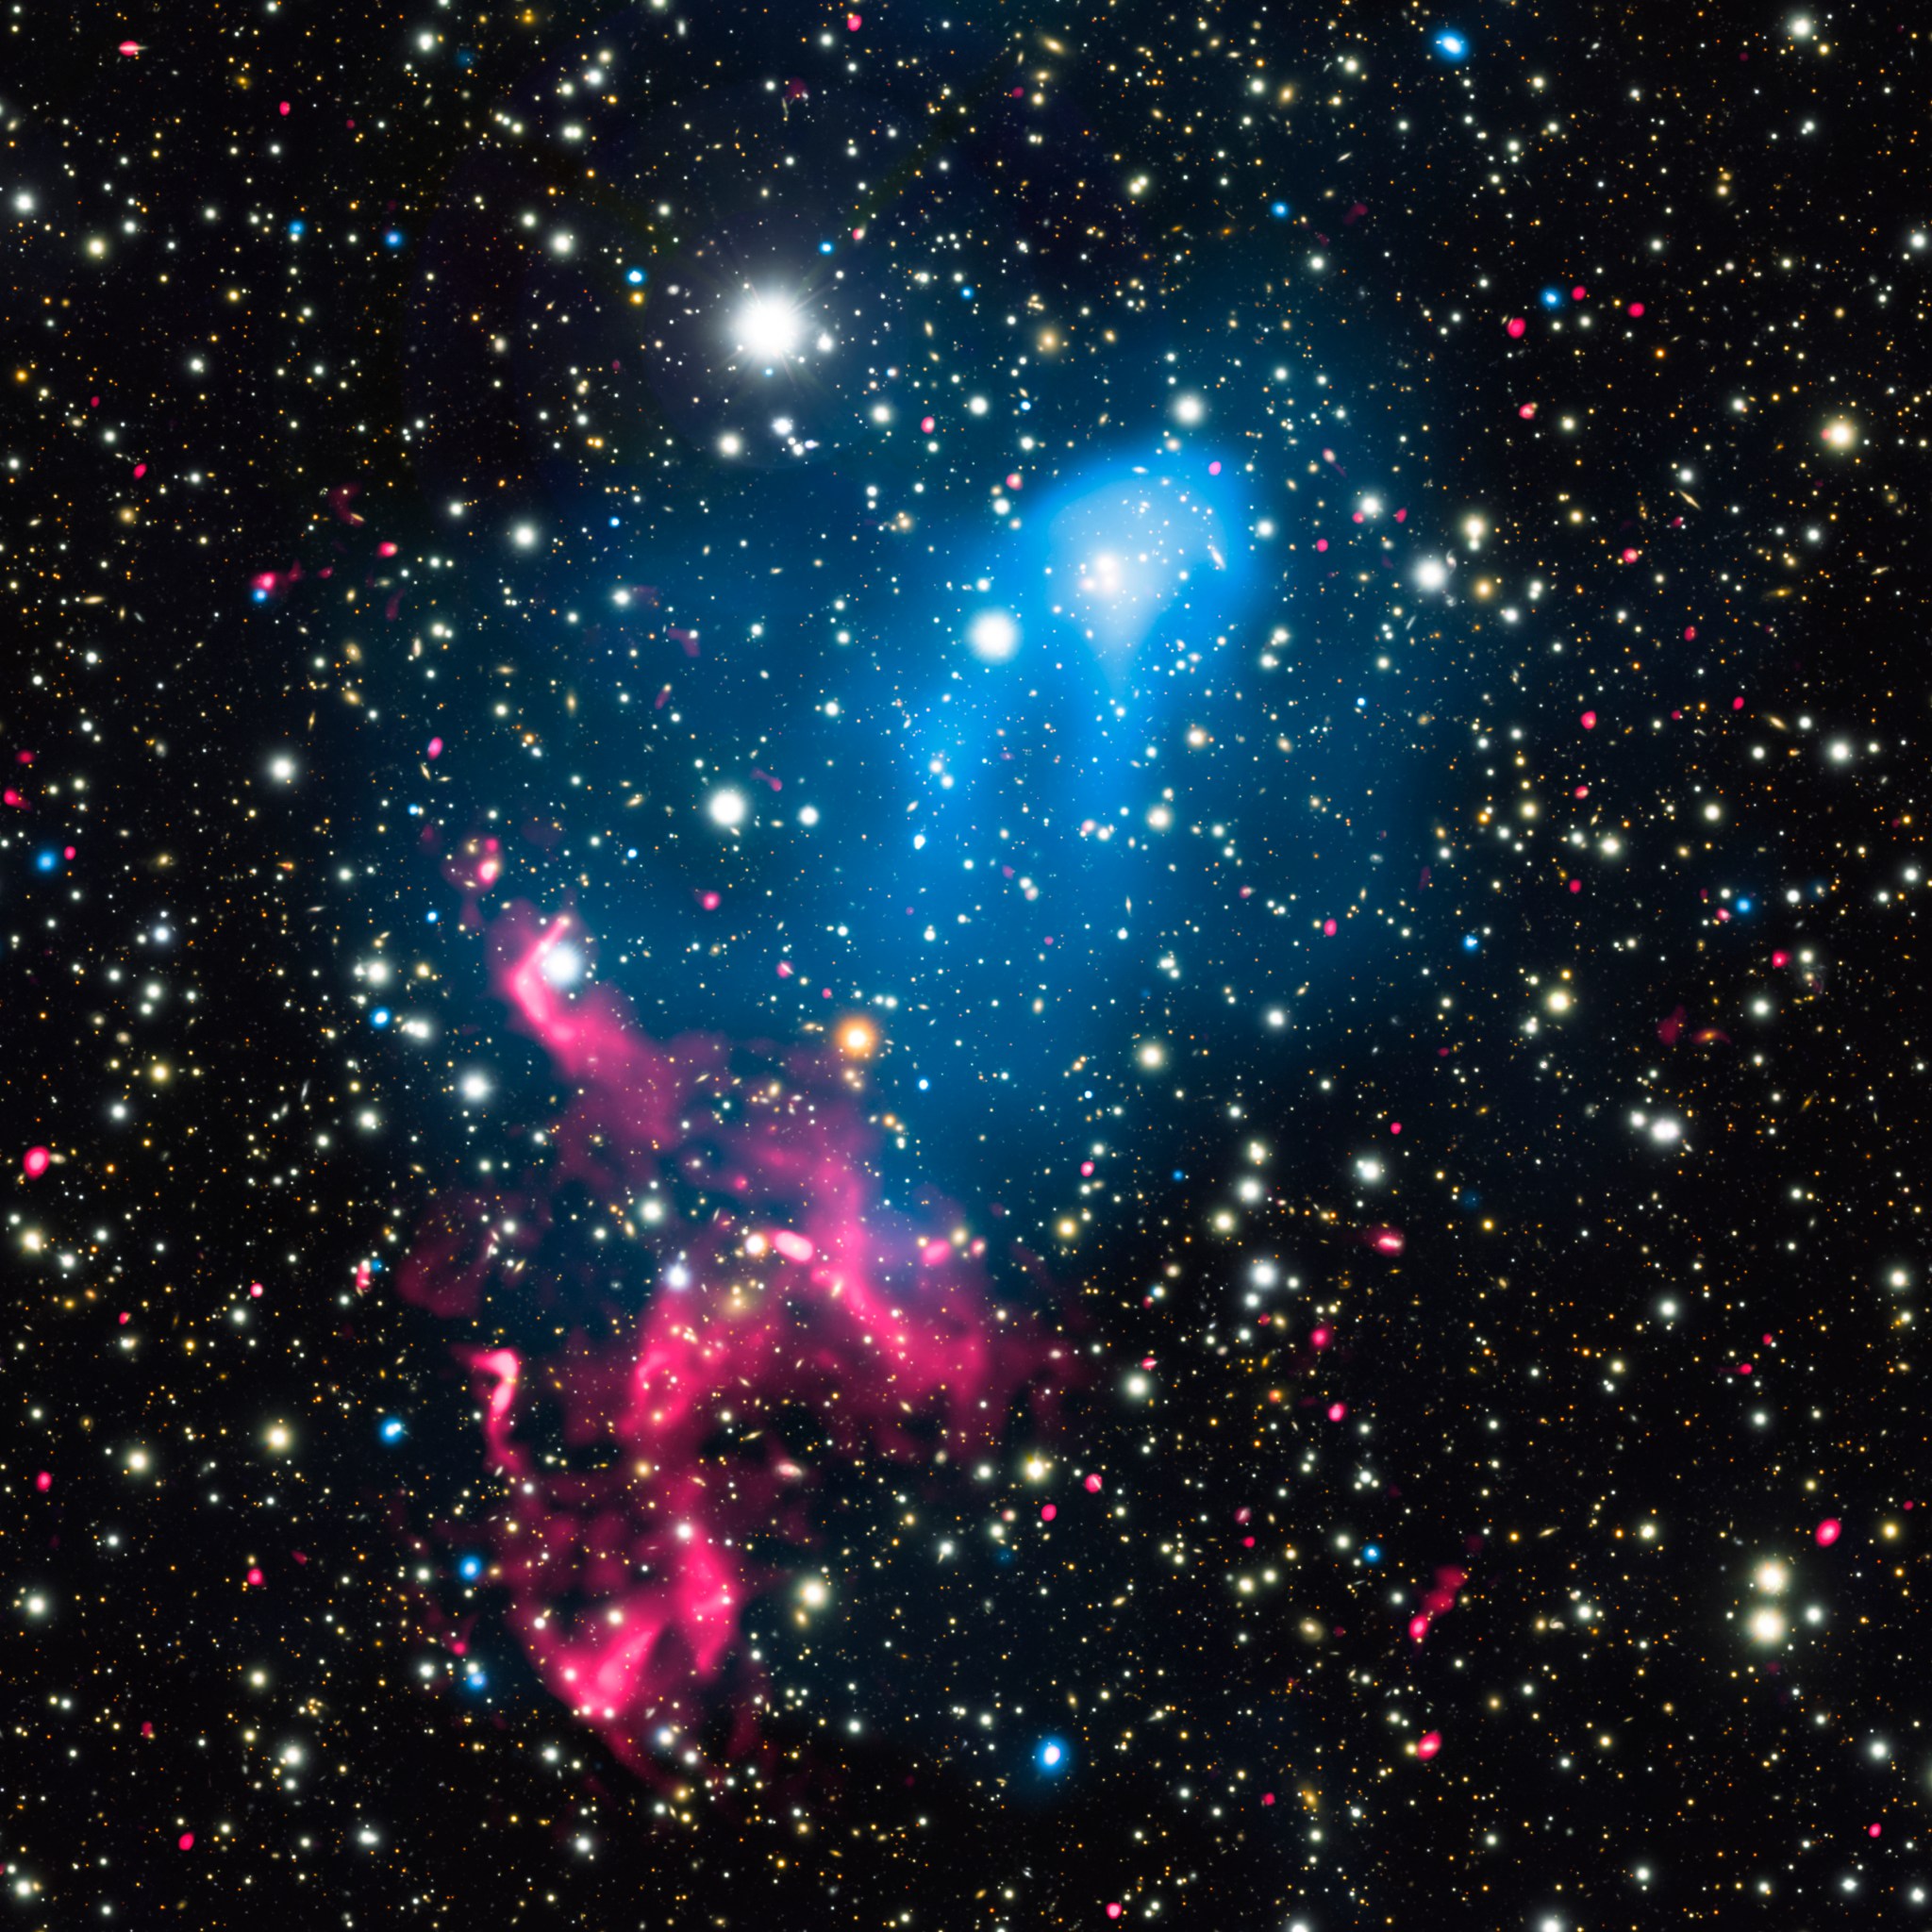 Galaxy Cluster Abell 3411